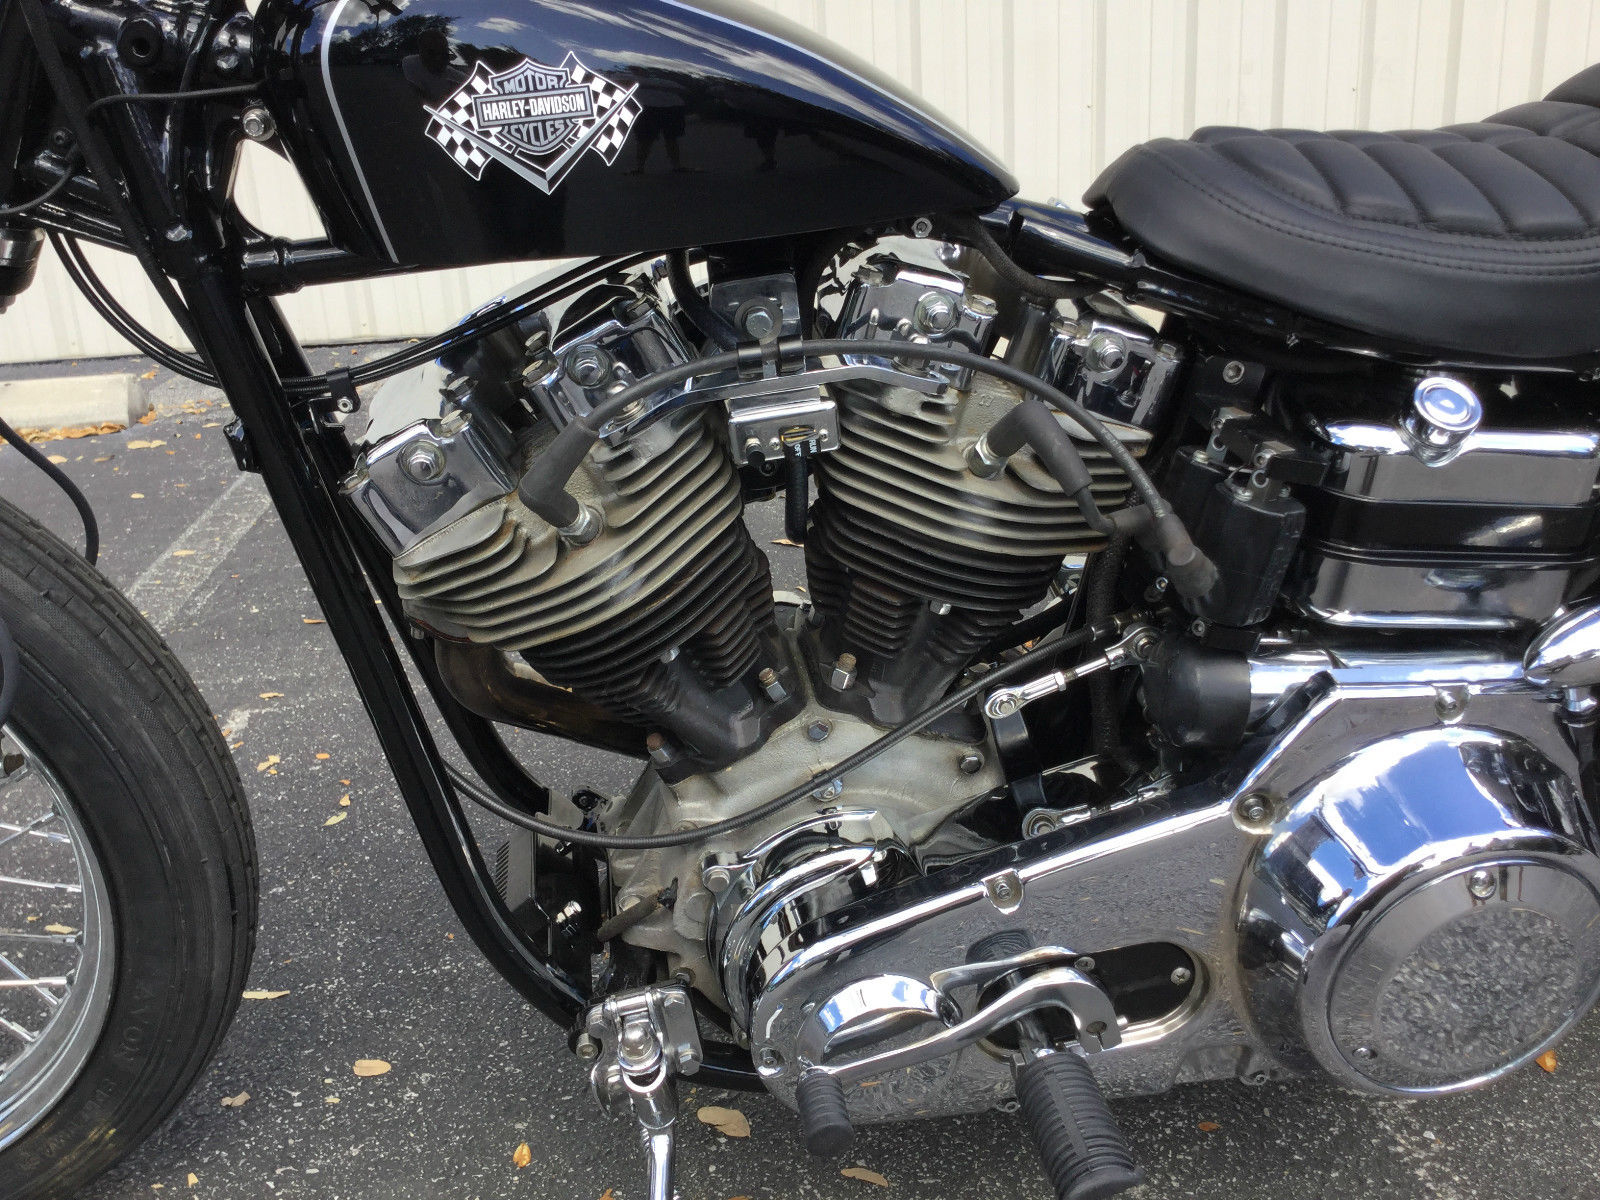 The Shovelhead FXS engine has been fully rebuilt by Zippers Performance.